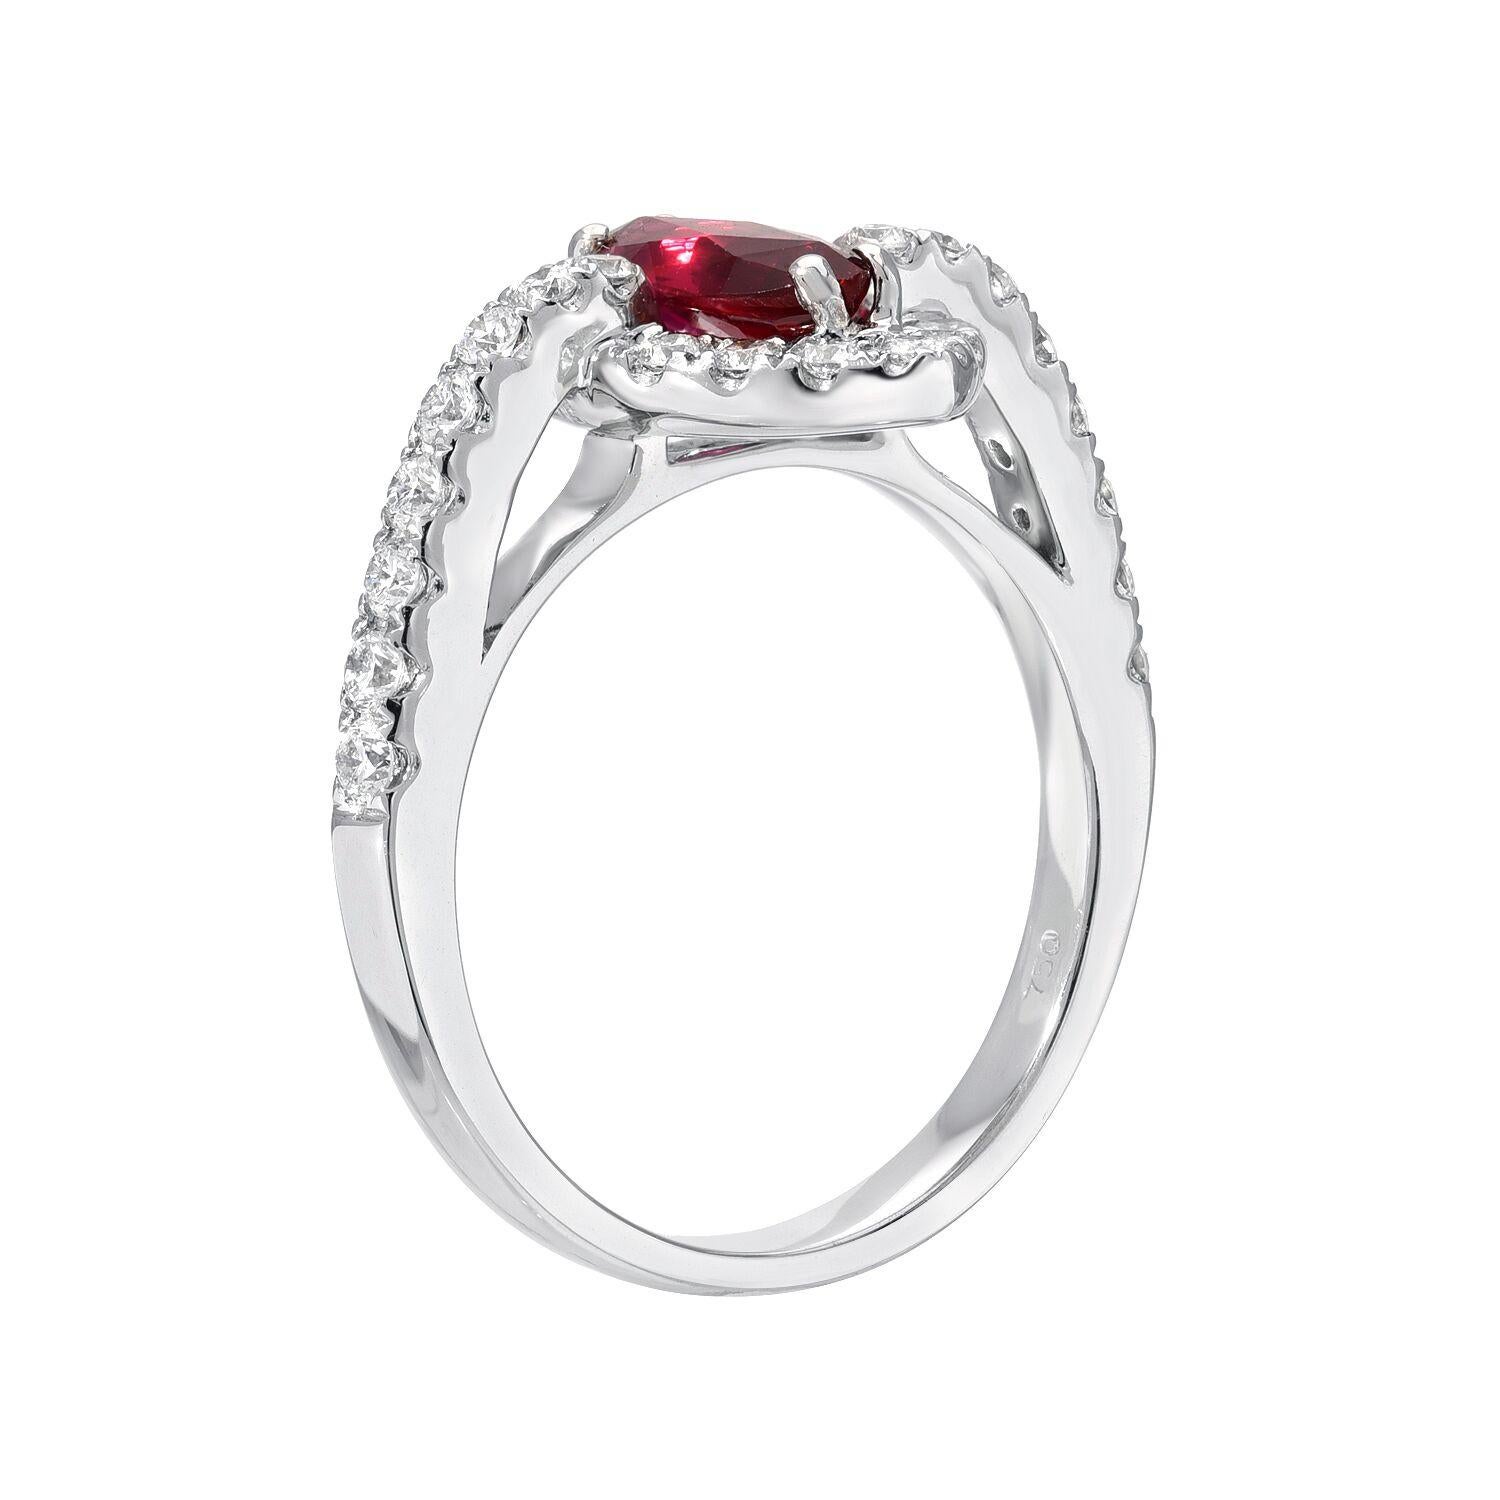 Natural Ruby unheated 1.01 carat marquise, set in a 0.55 carat total, round brilliant diamond and 18K white gold engagement ring or cocktail ring. 
Ring size 6.5. Re-sizing is complimentary upon request. 
The GIA certificate is attached to the